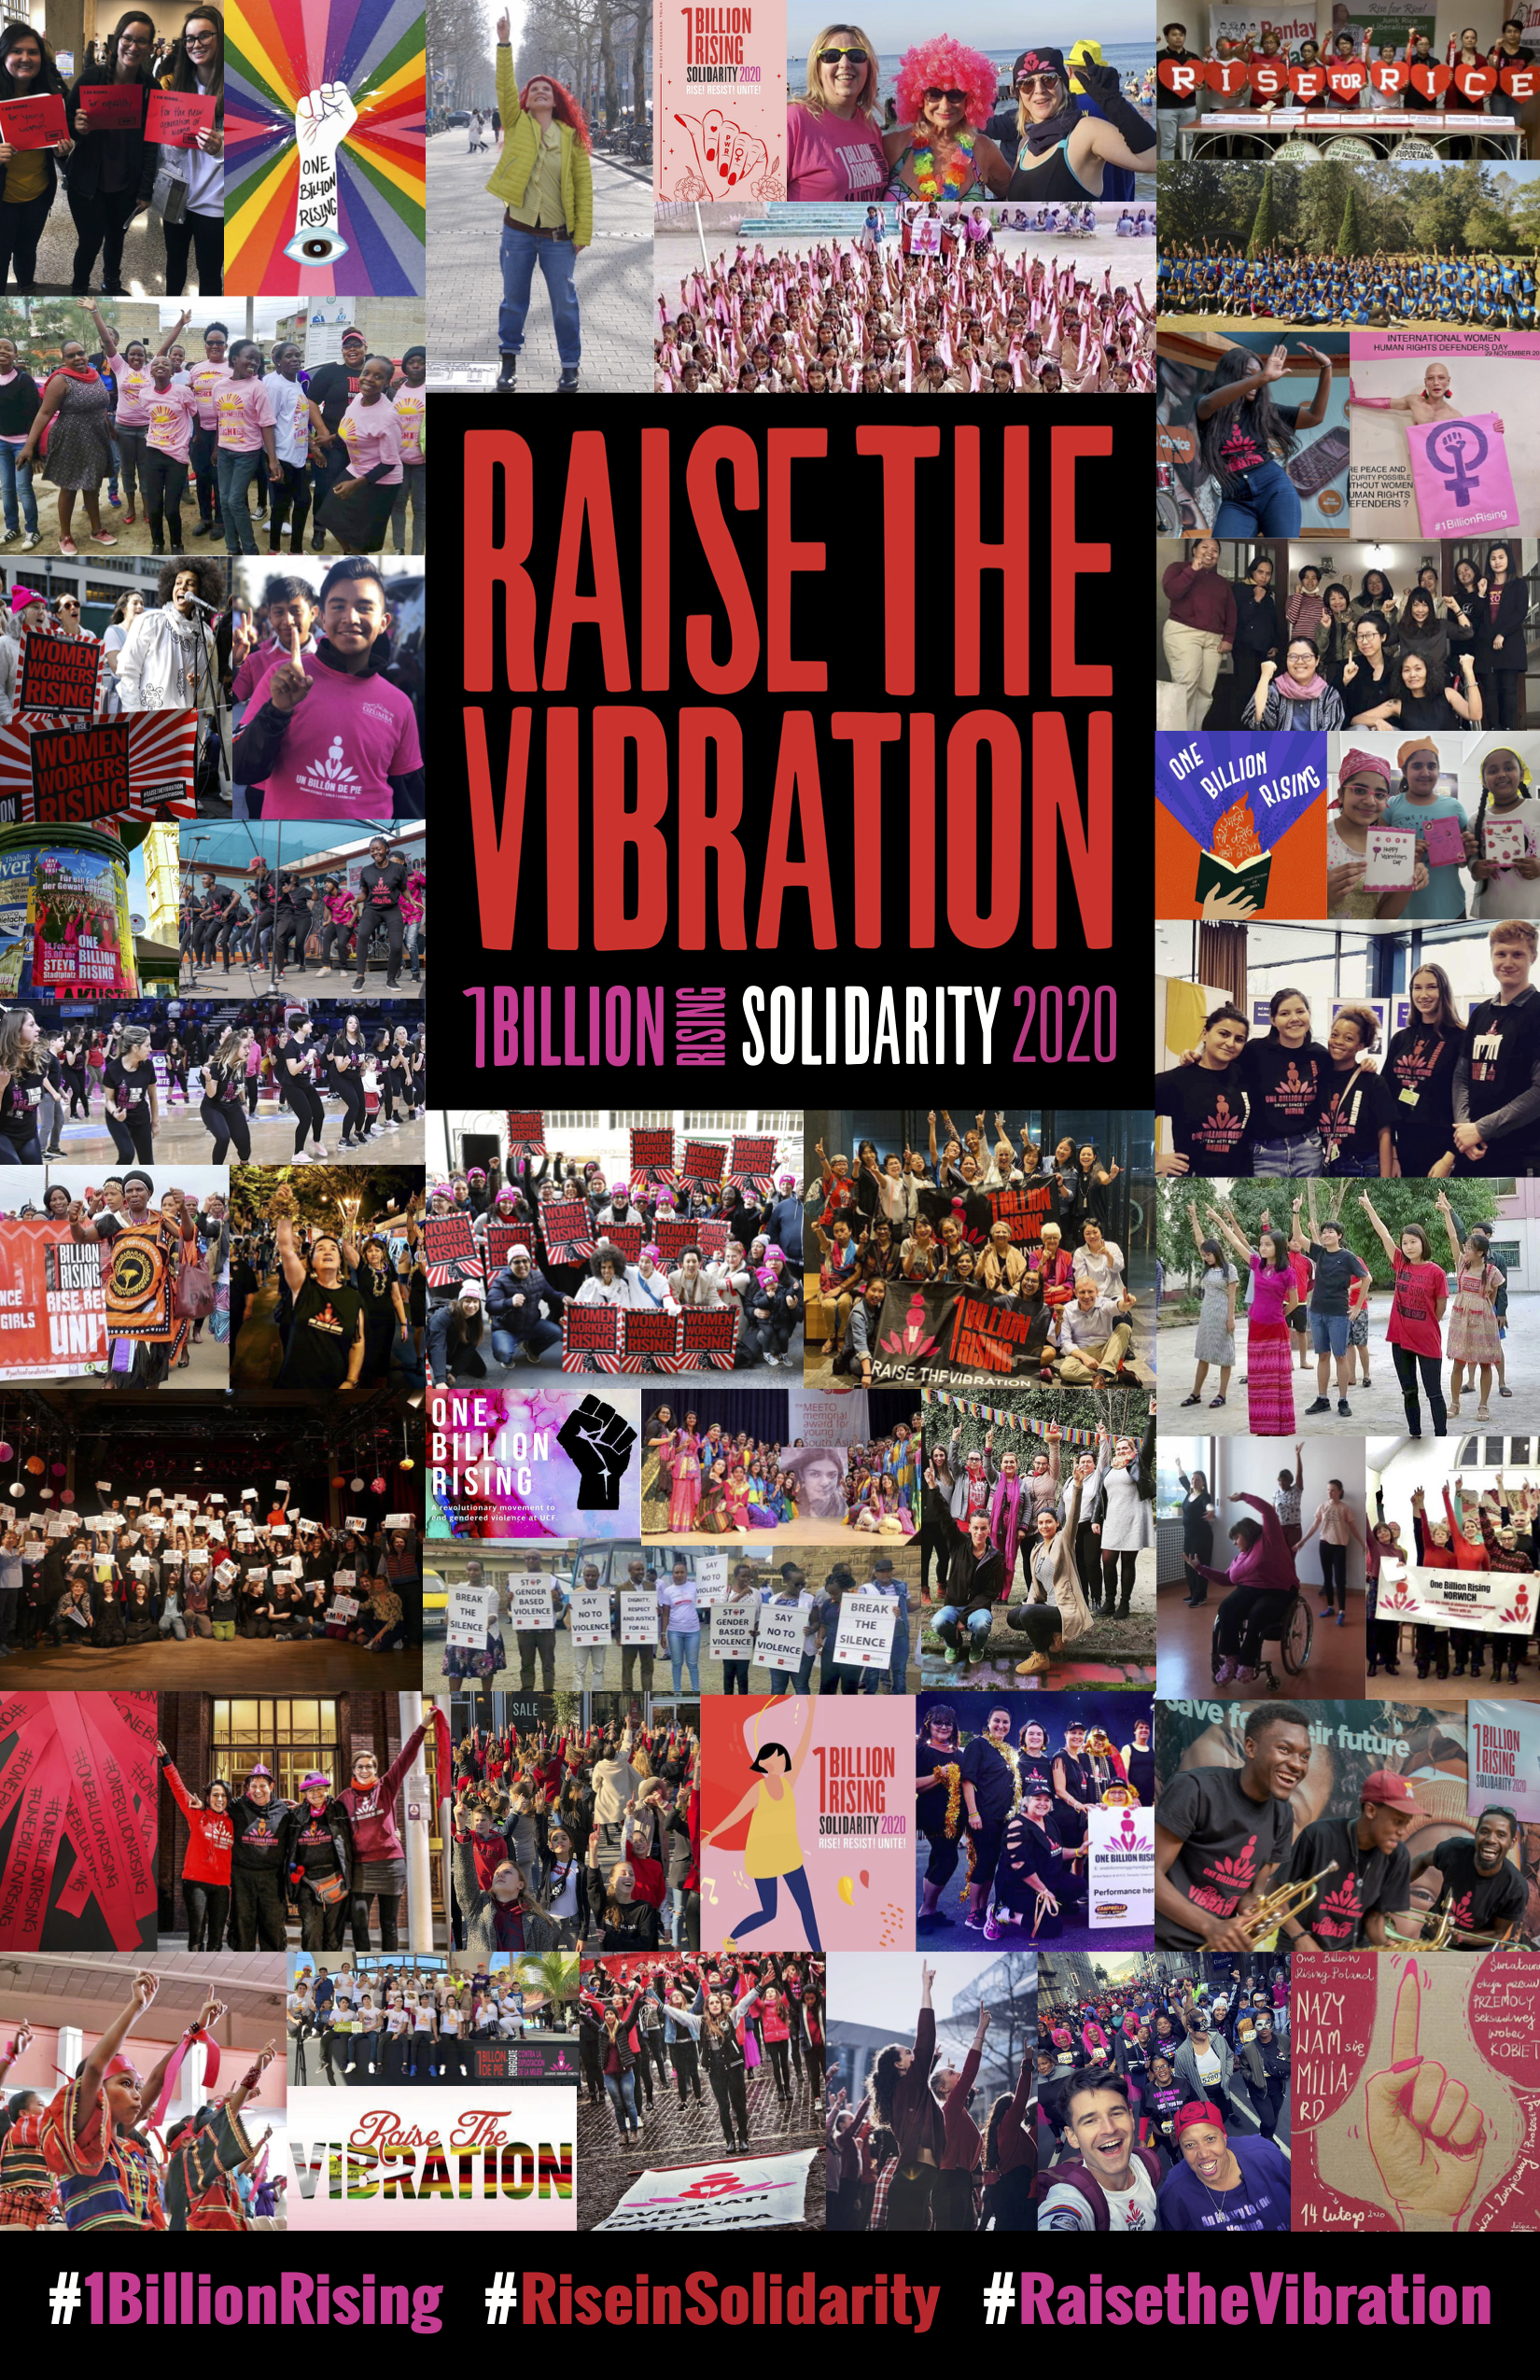 Sing along to the One Billion Rising anthem, 'We Are Rising', and RISE in  2022! . The lyrics to #WeAreRising – the song I wrote, By V-Day